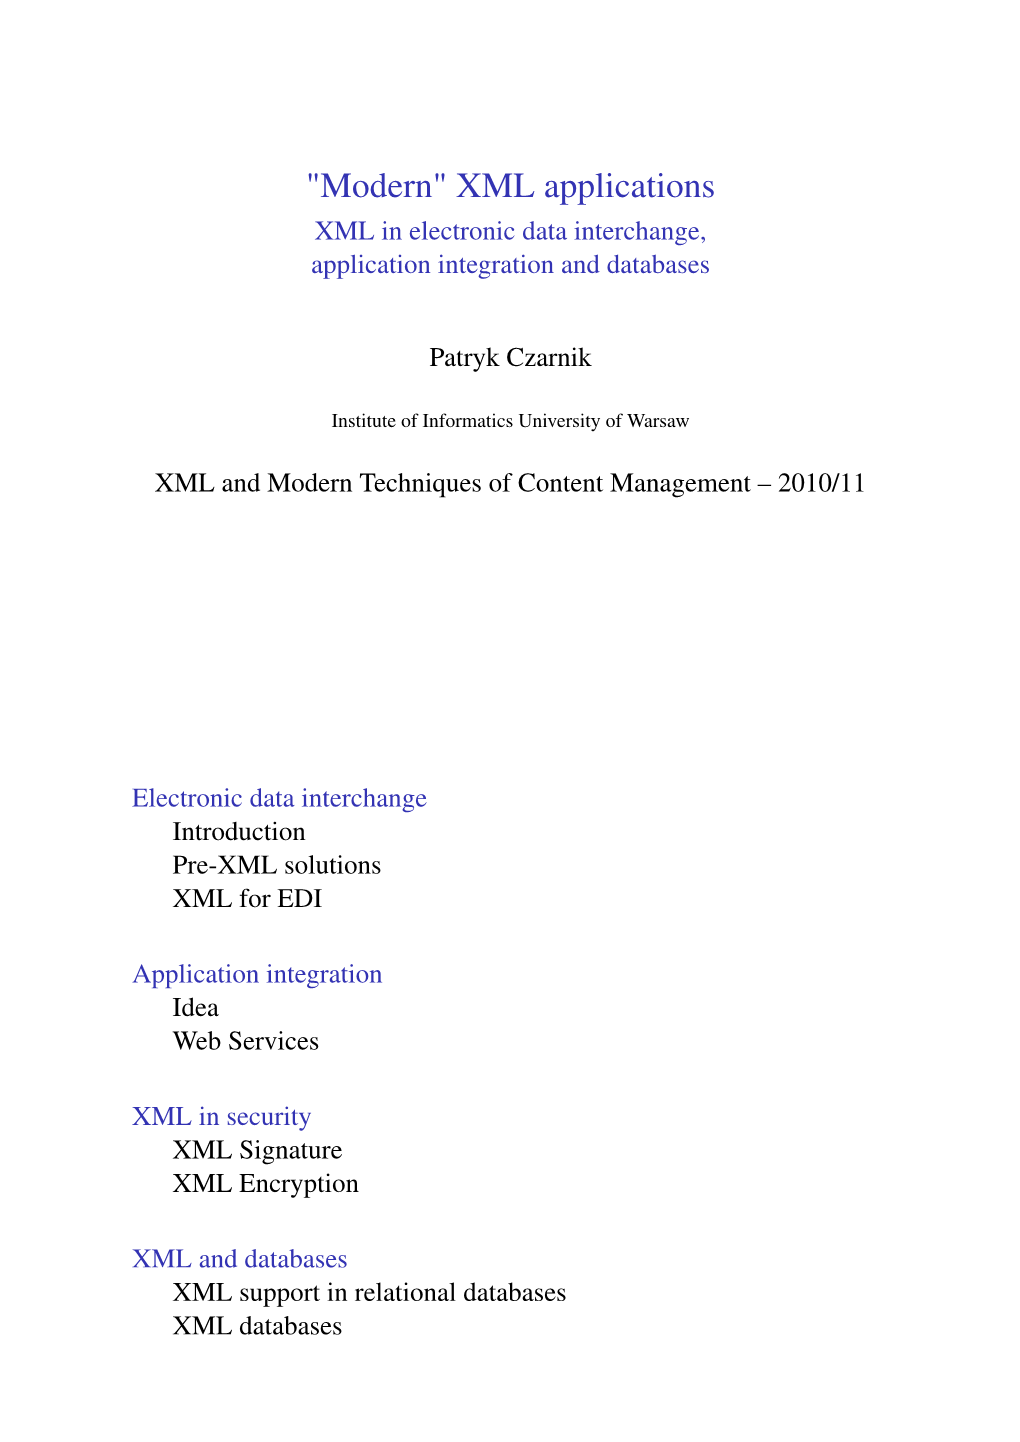 XML in Electronic Data Interchange, Application Integration and Databases